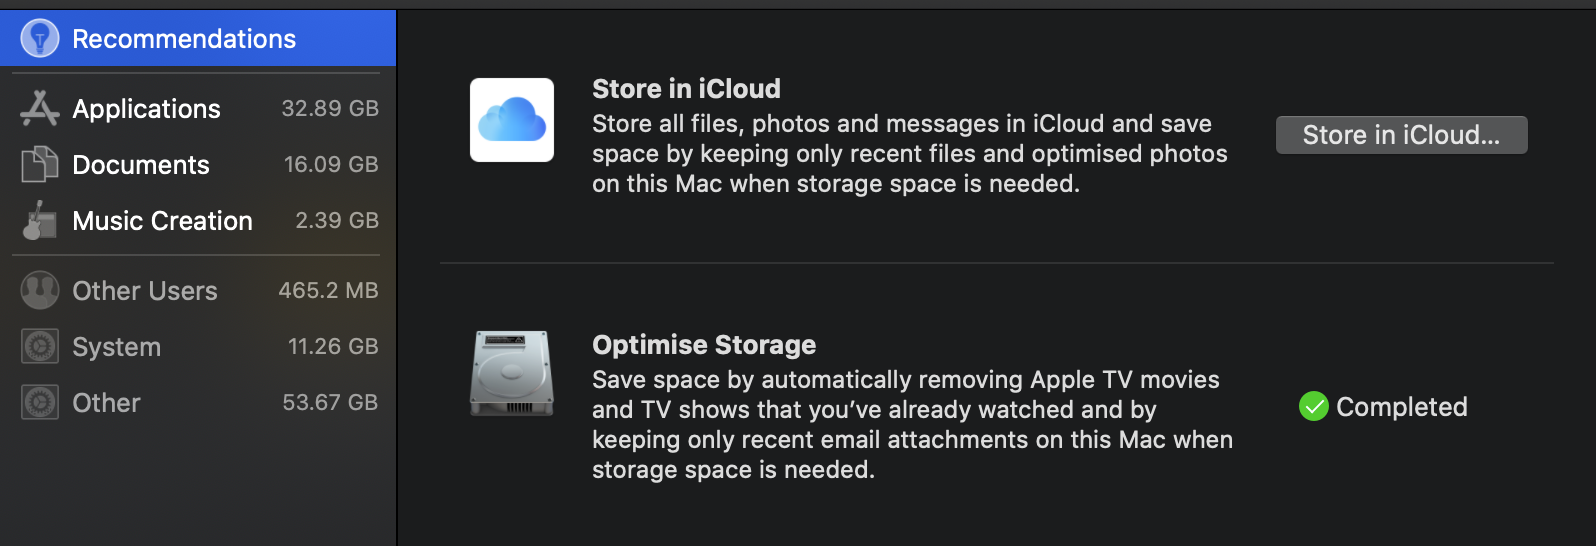 macOS storage analysis example showing others